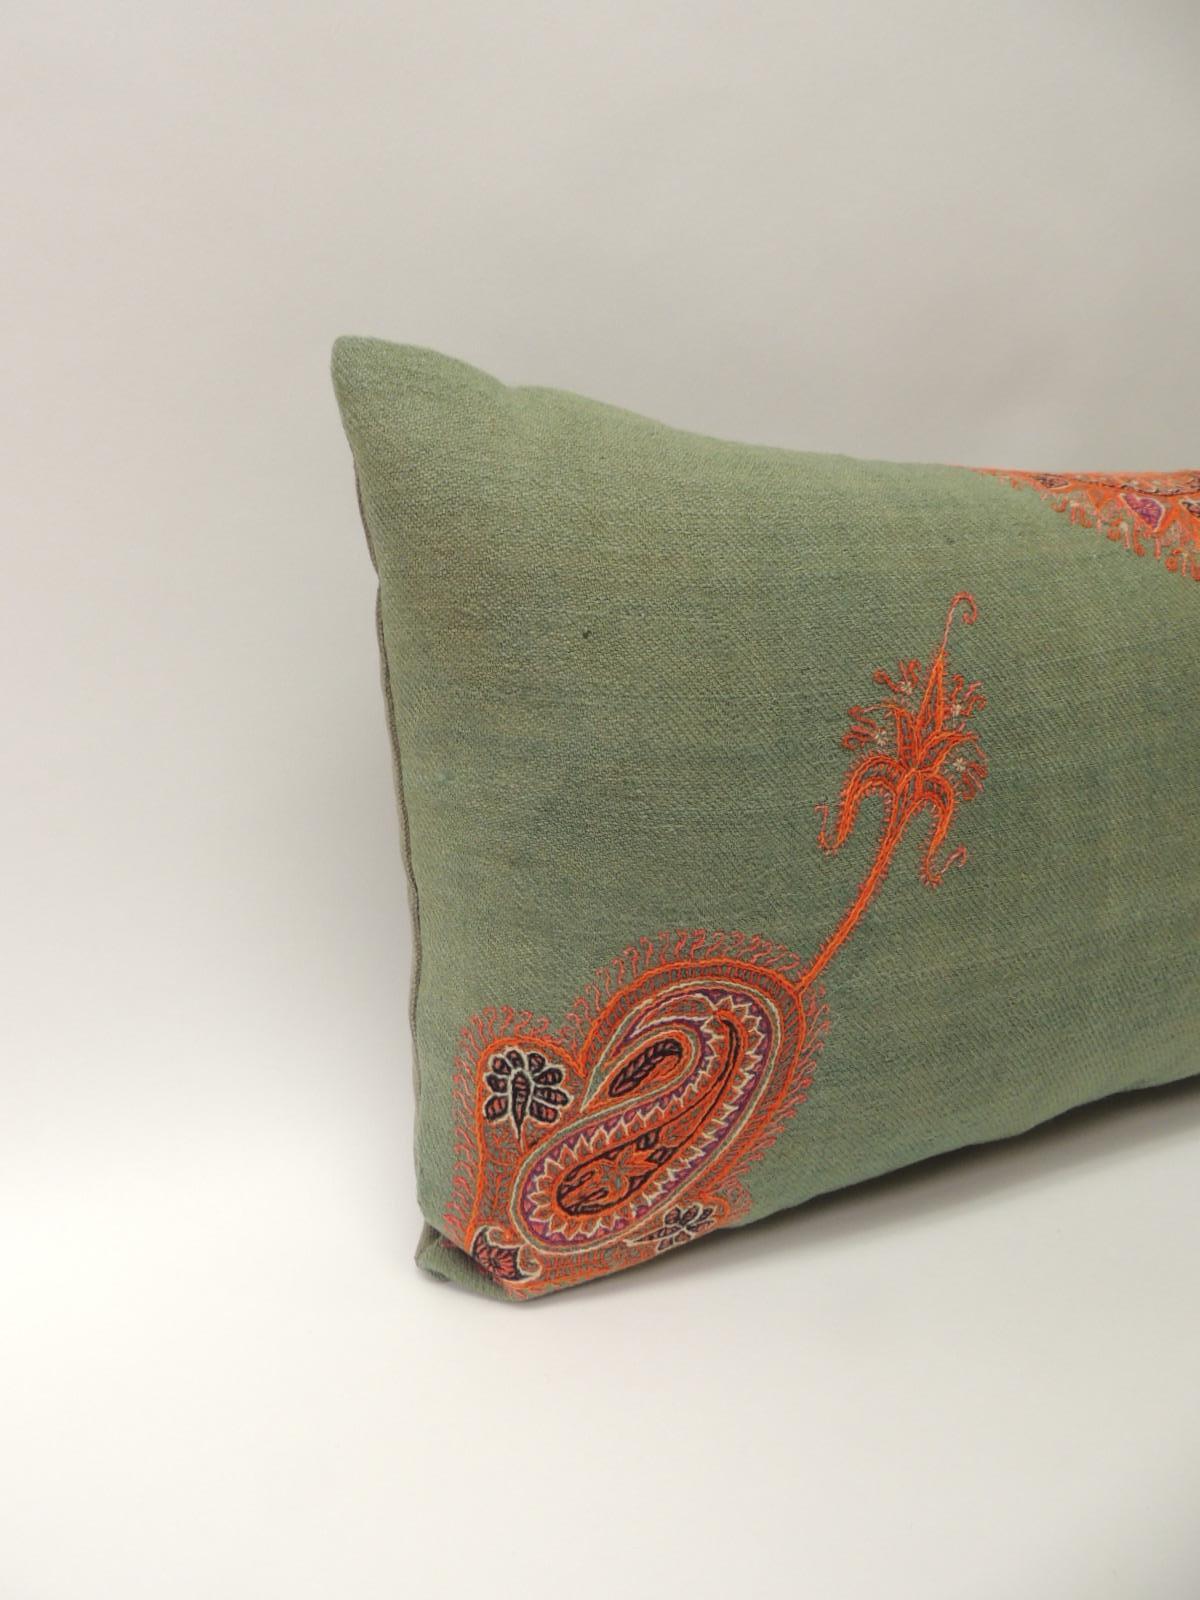 Pair of 19th century Paisley embroidery Persian long bolsters pillows
Antique Persian embroidered long bolster decorative pillows. Textiles on accent pillow embellished with silk threads embroidered onto green wool. Throw pillows enhanced with a